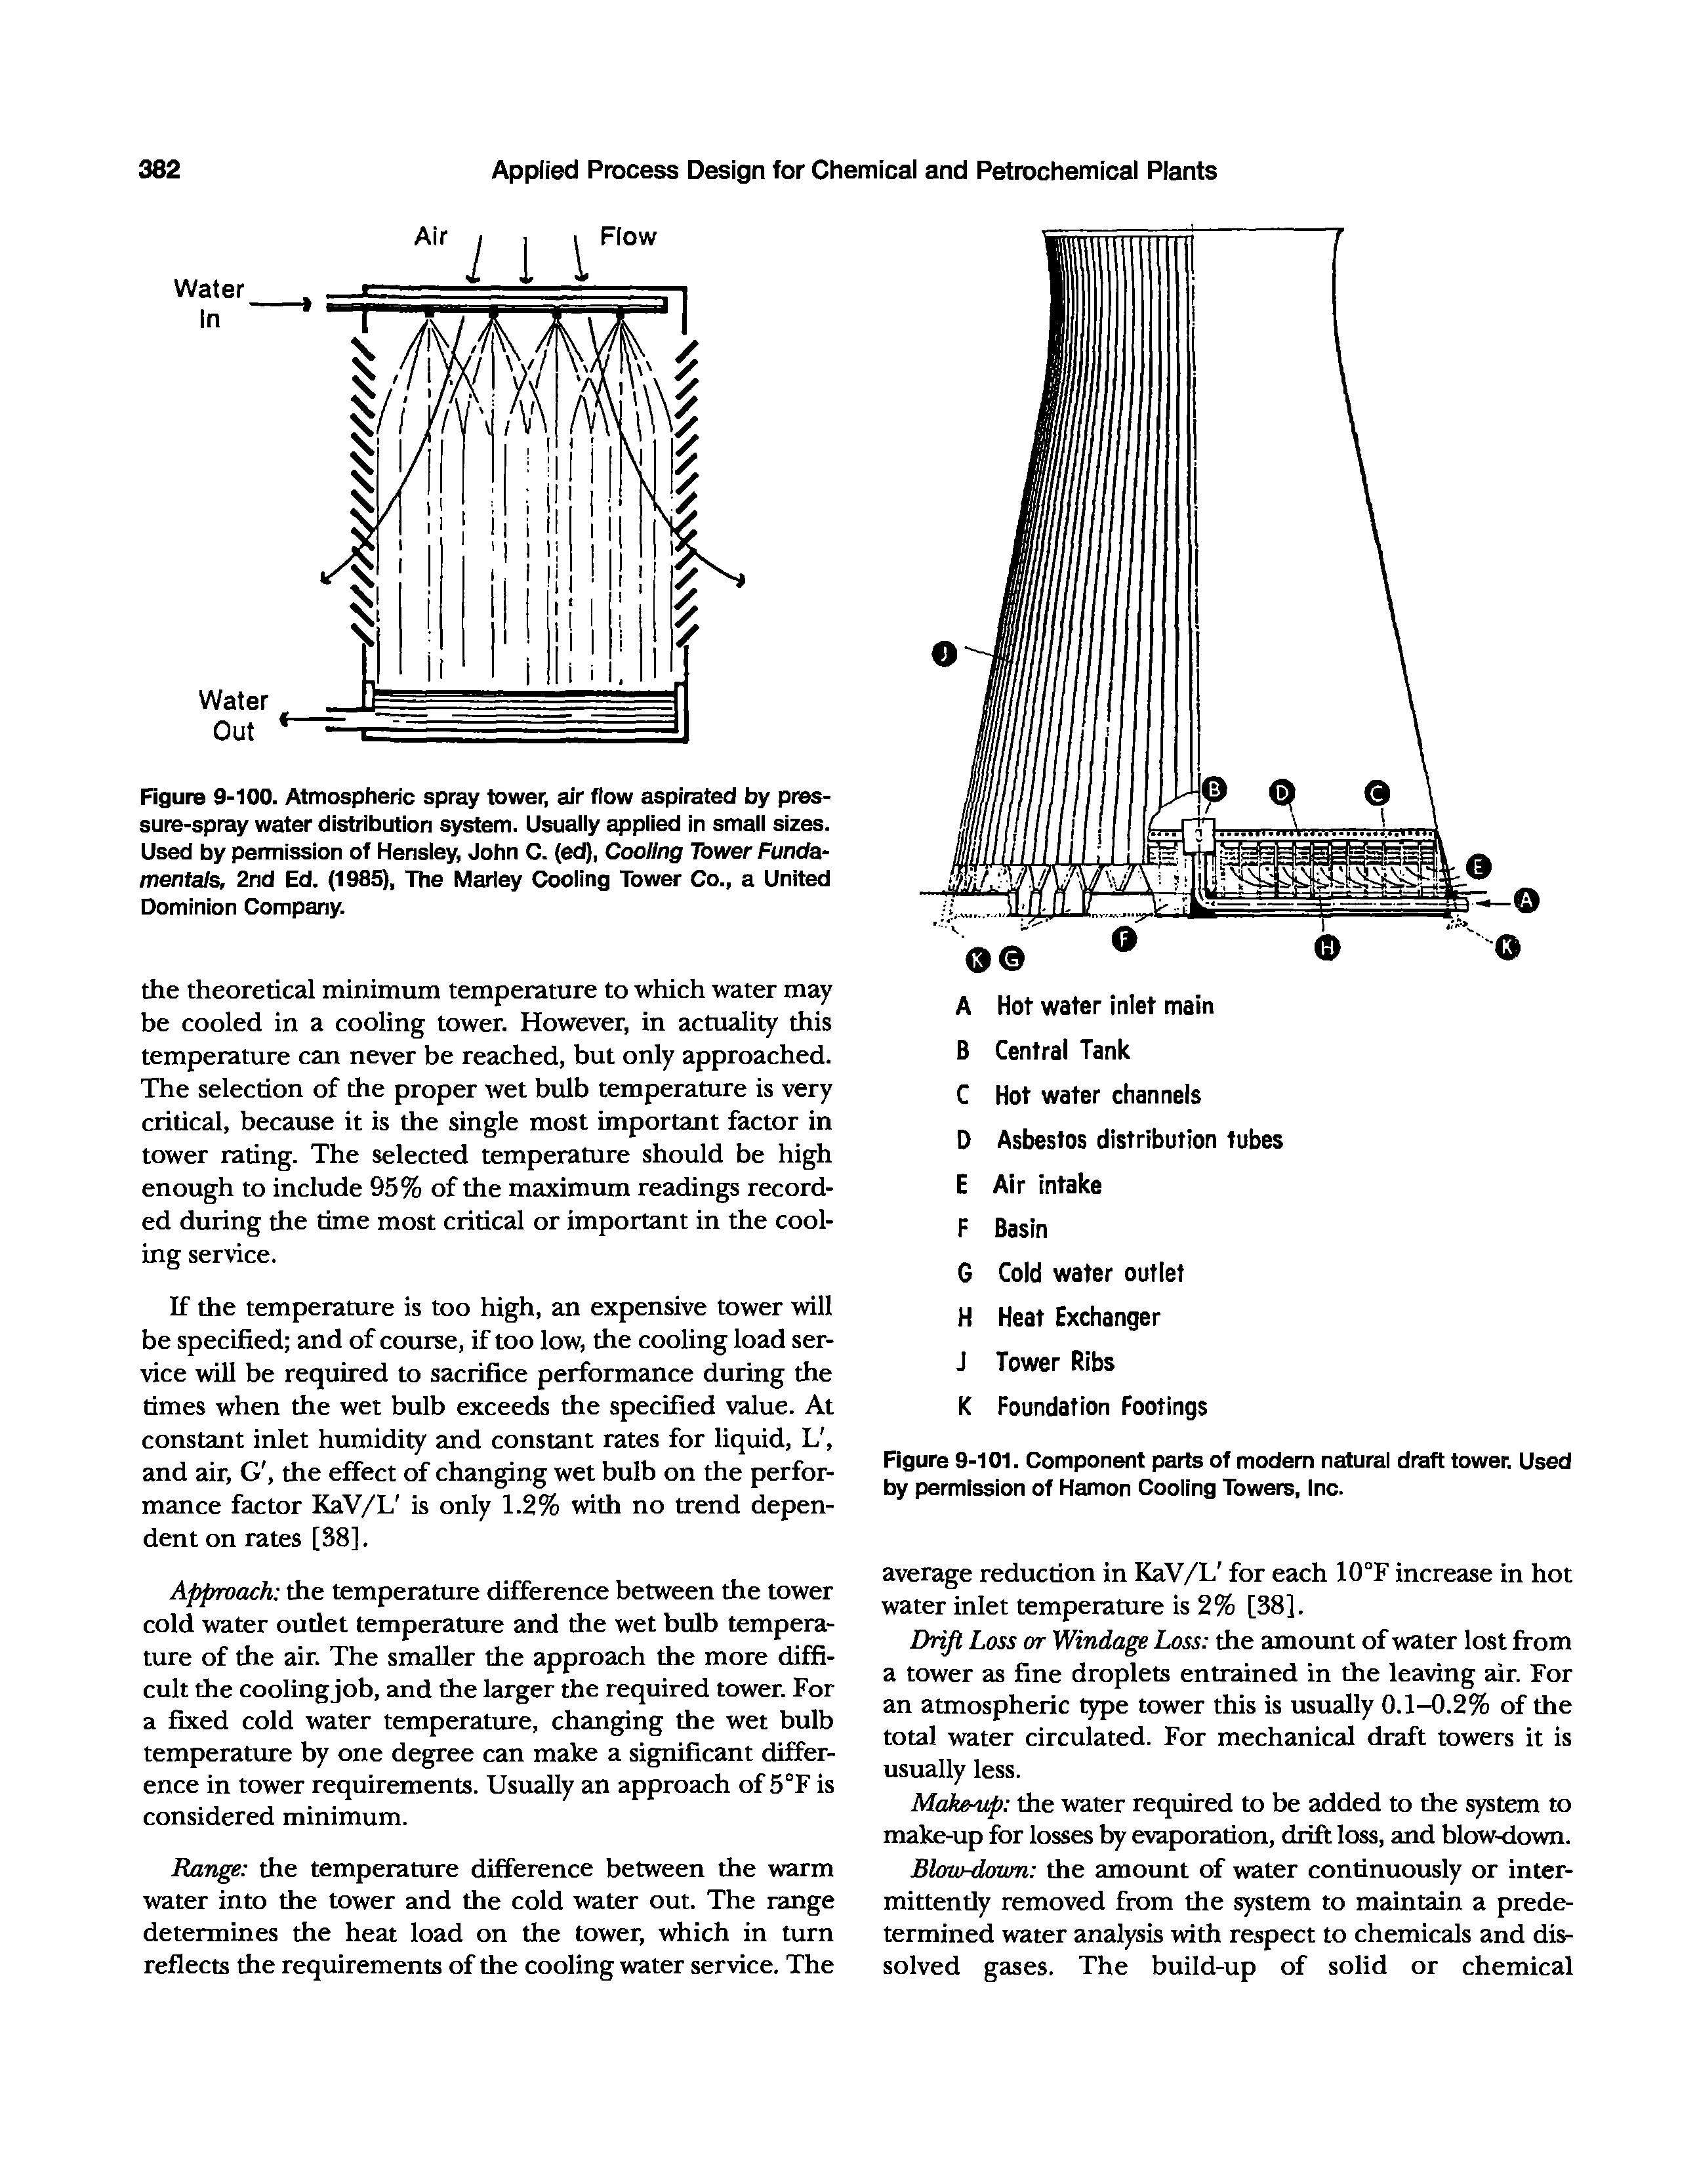 Figure 9-100. Atmospheric spray tower, air flow aspirated by pressure-spray water distribution system. Usually applied in small sizes. Used by permission of Hensley, John C. (ed), Cooling Tower Funds.-menteUs, 2nd Ed. (1985), The Mariey Cooling Tower Co., a United Dominion Company.